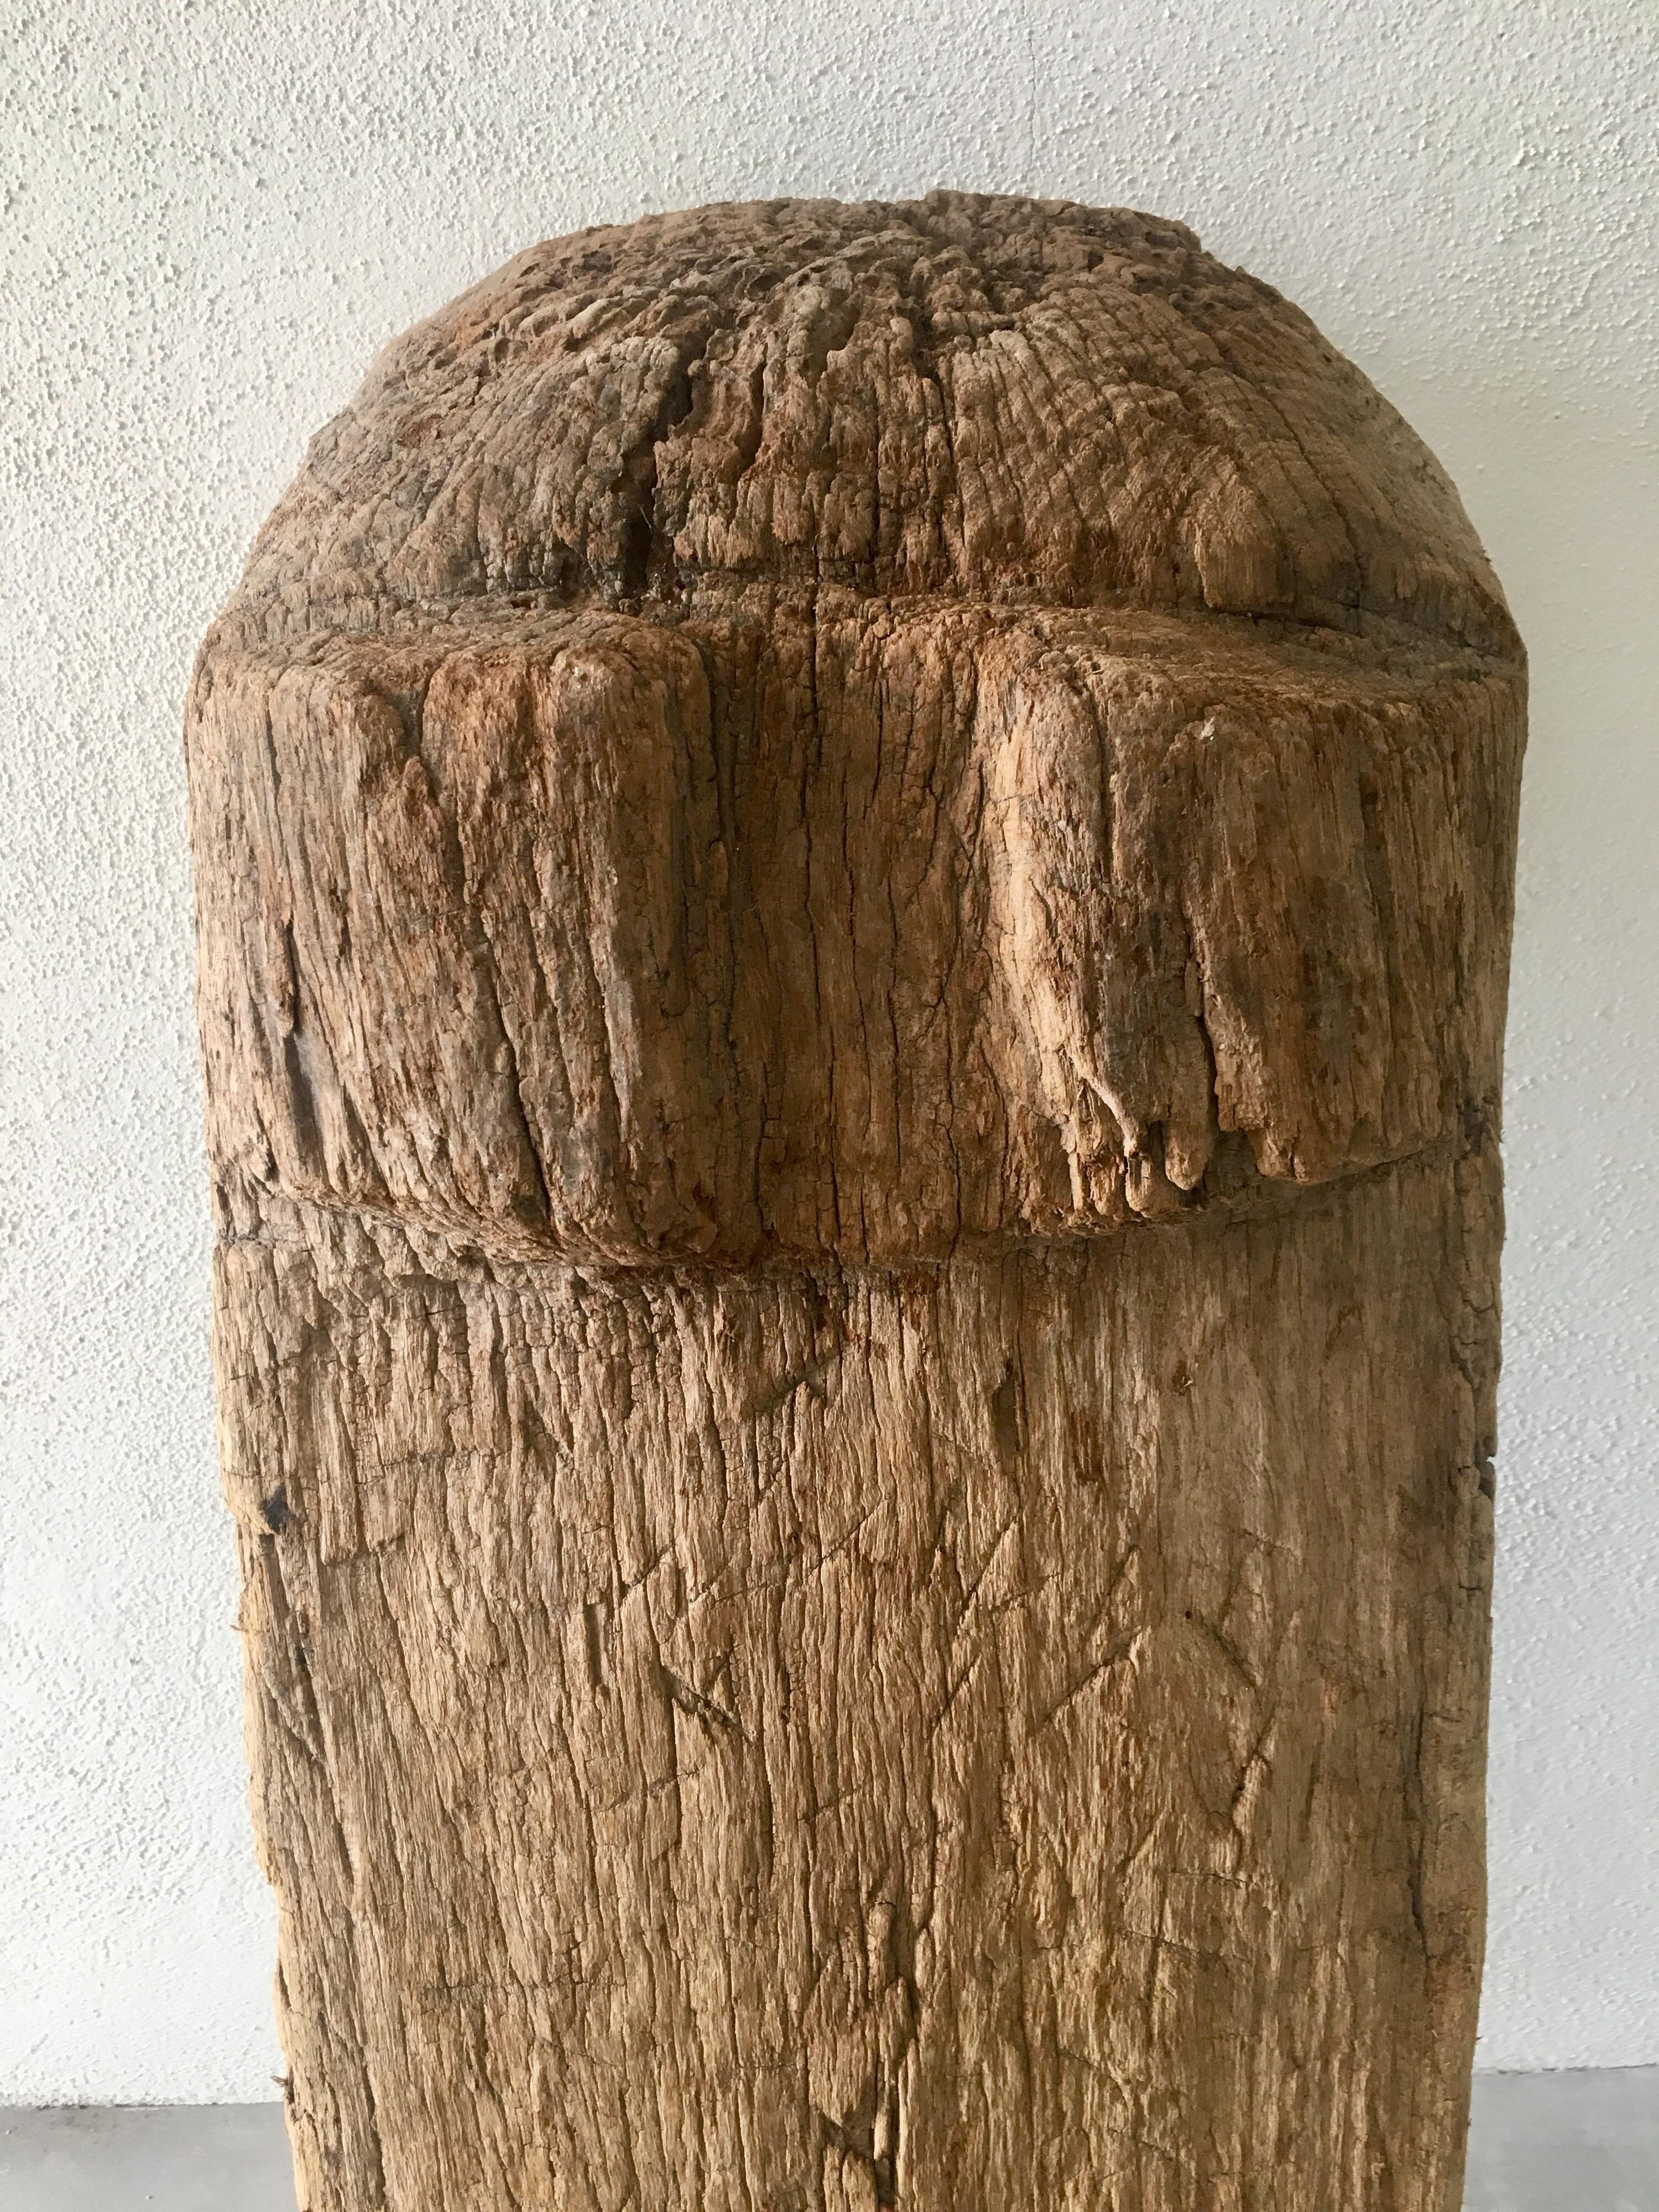 Hand-Carved Mesquite Trough from Mexico